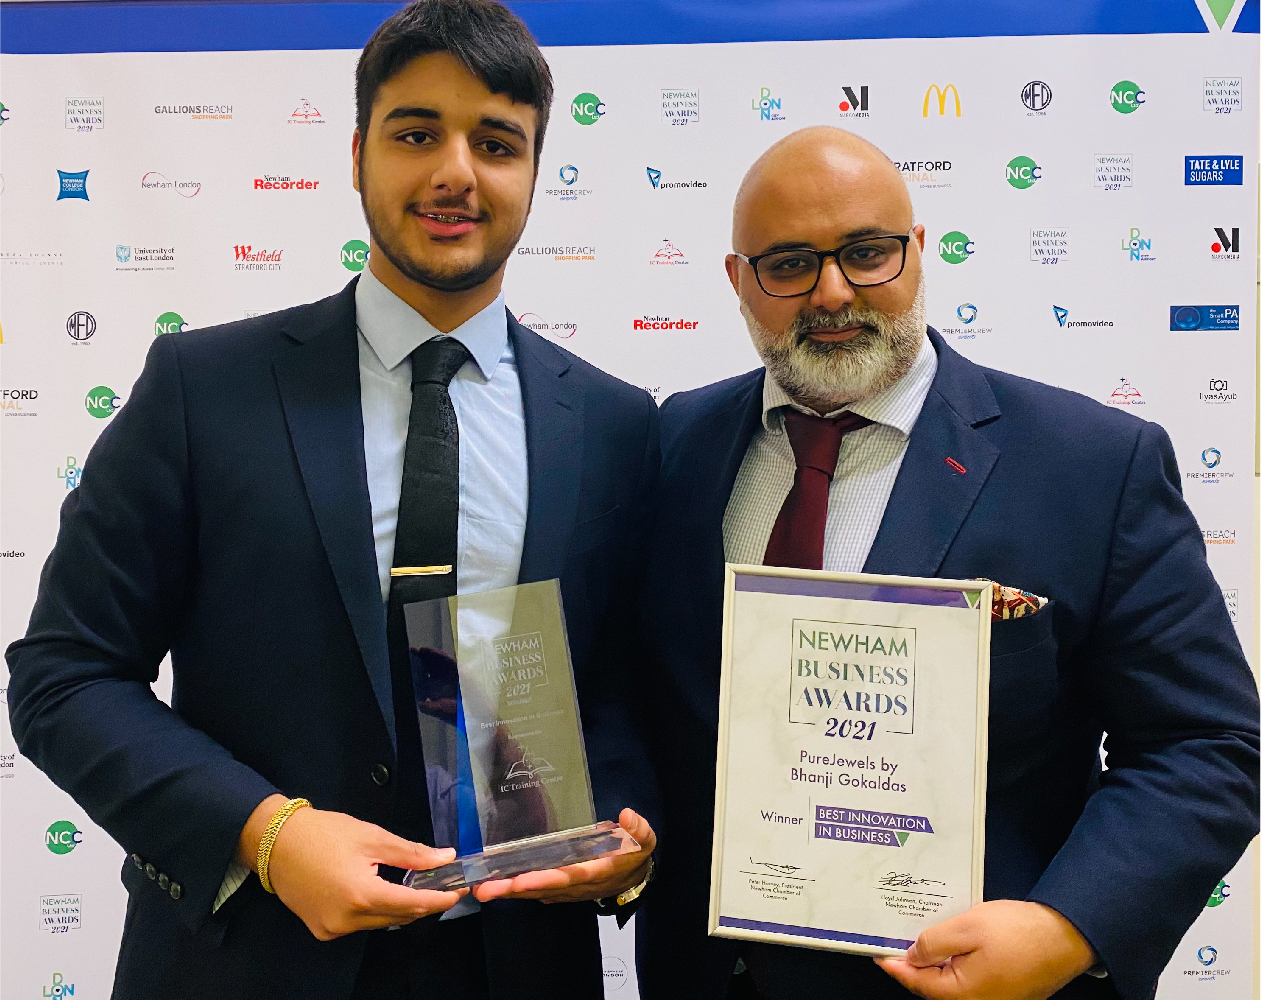 East London Jeweller PureJewels by Bhanji Gokaldas wins “Best Innovation in Business 2021” at Newham Chamber of Commerce awards